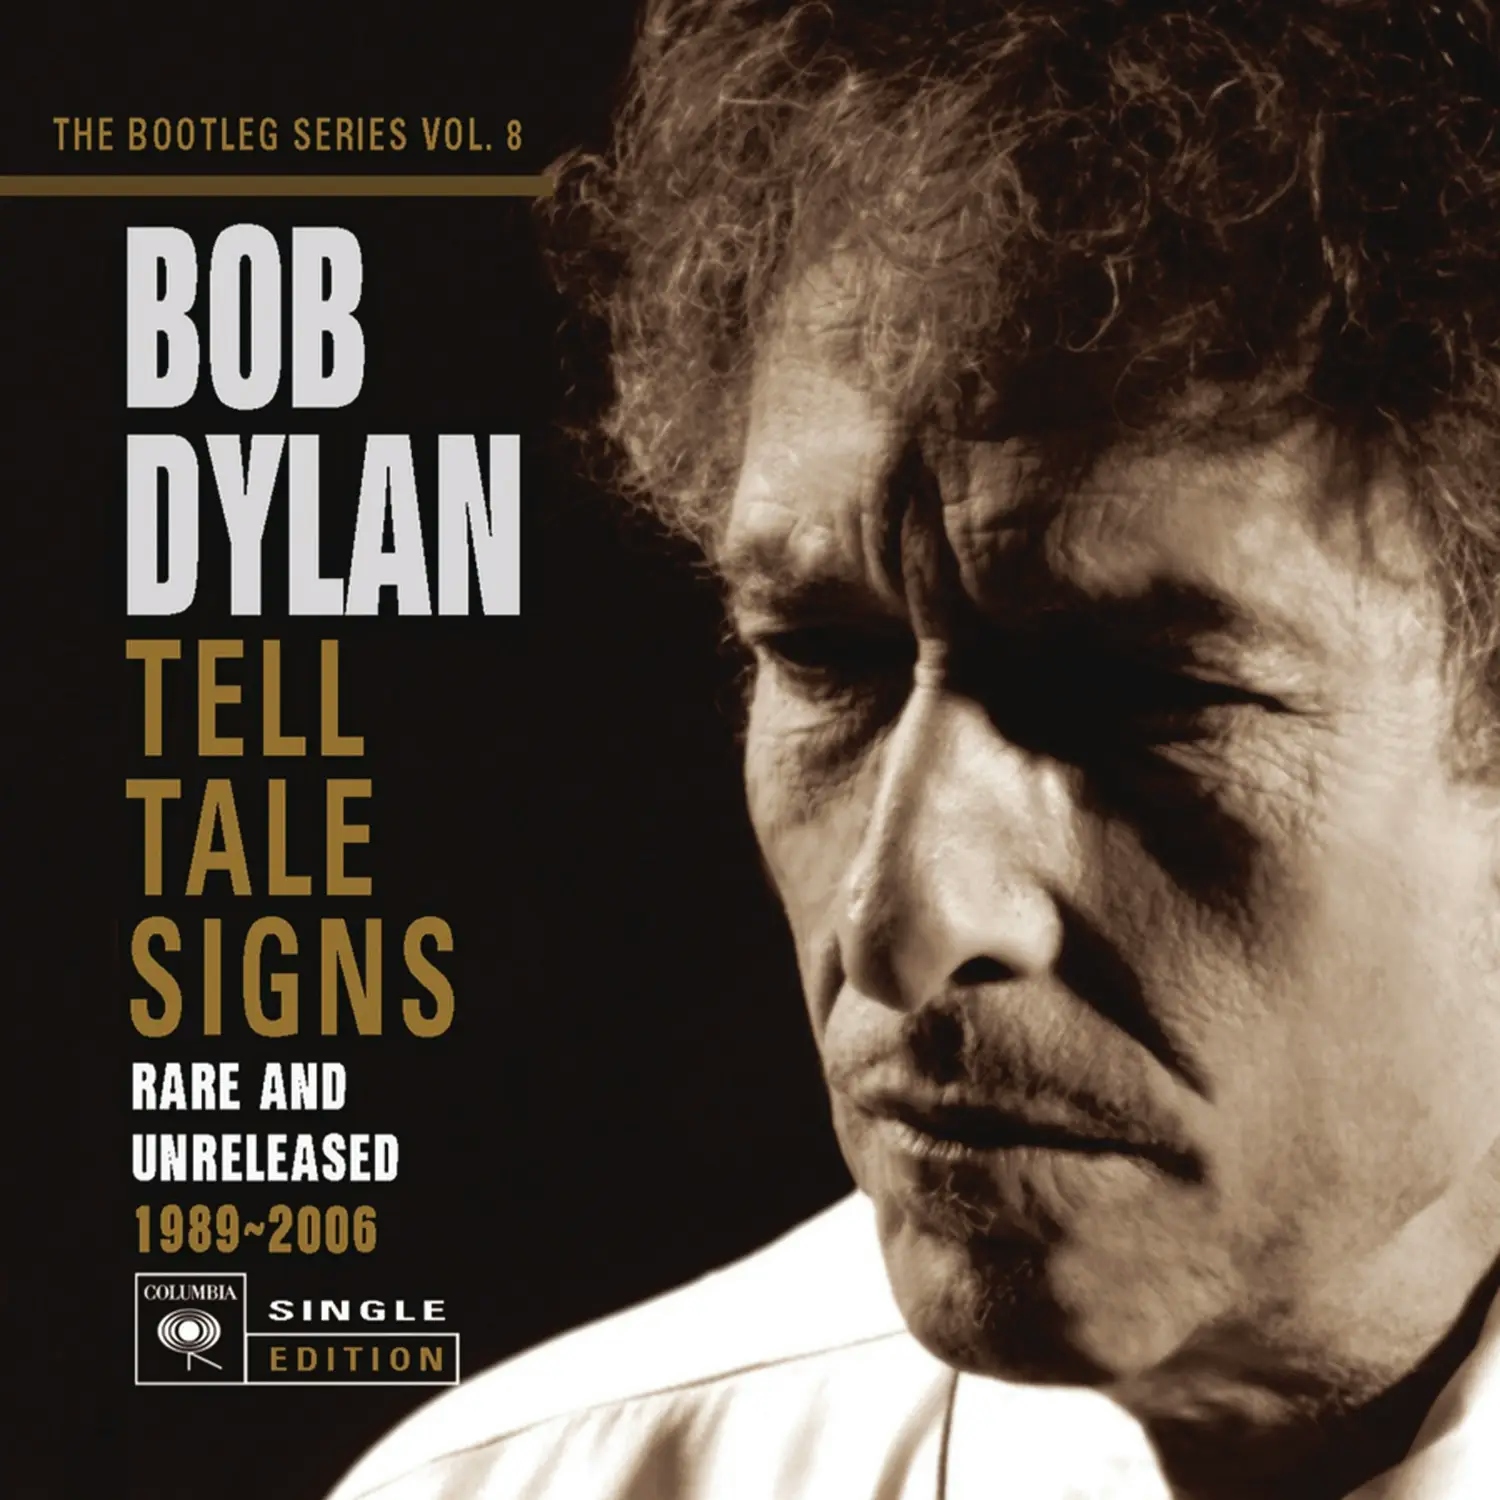 Album artwork for Bootleg Series Volume 8 - Tell Tale Signs CD by Bob Dylan